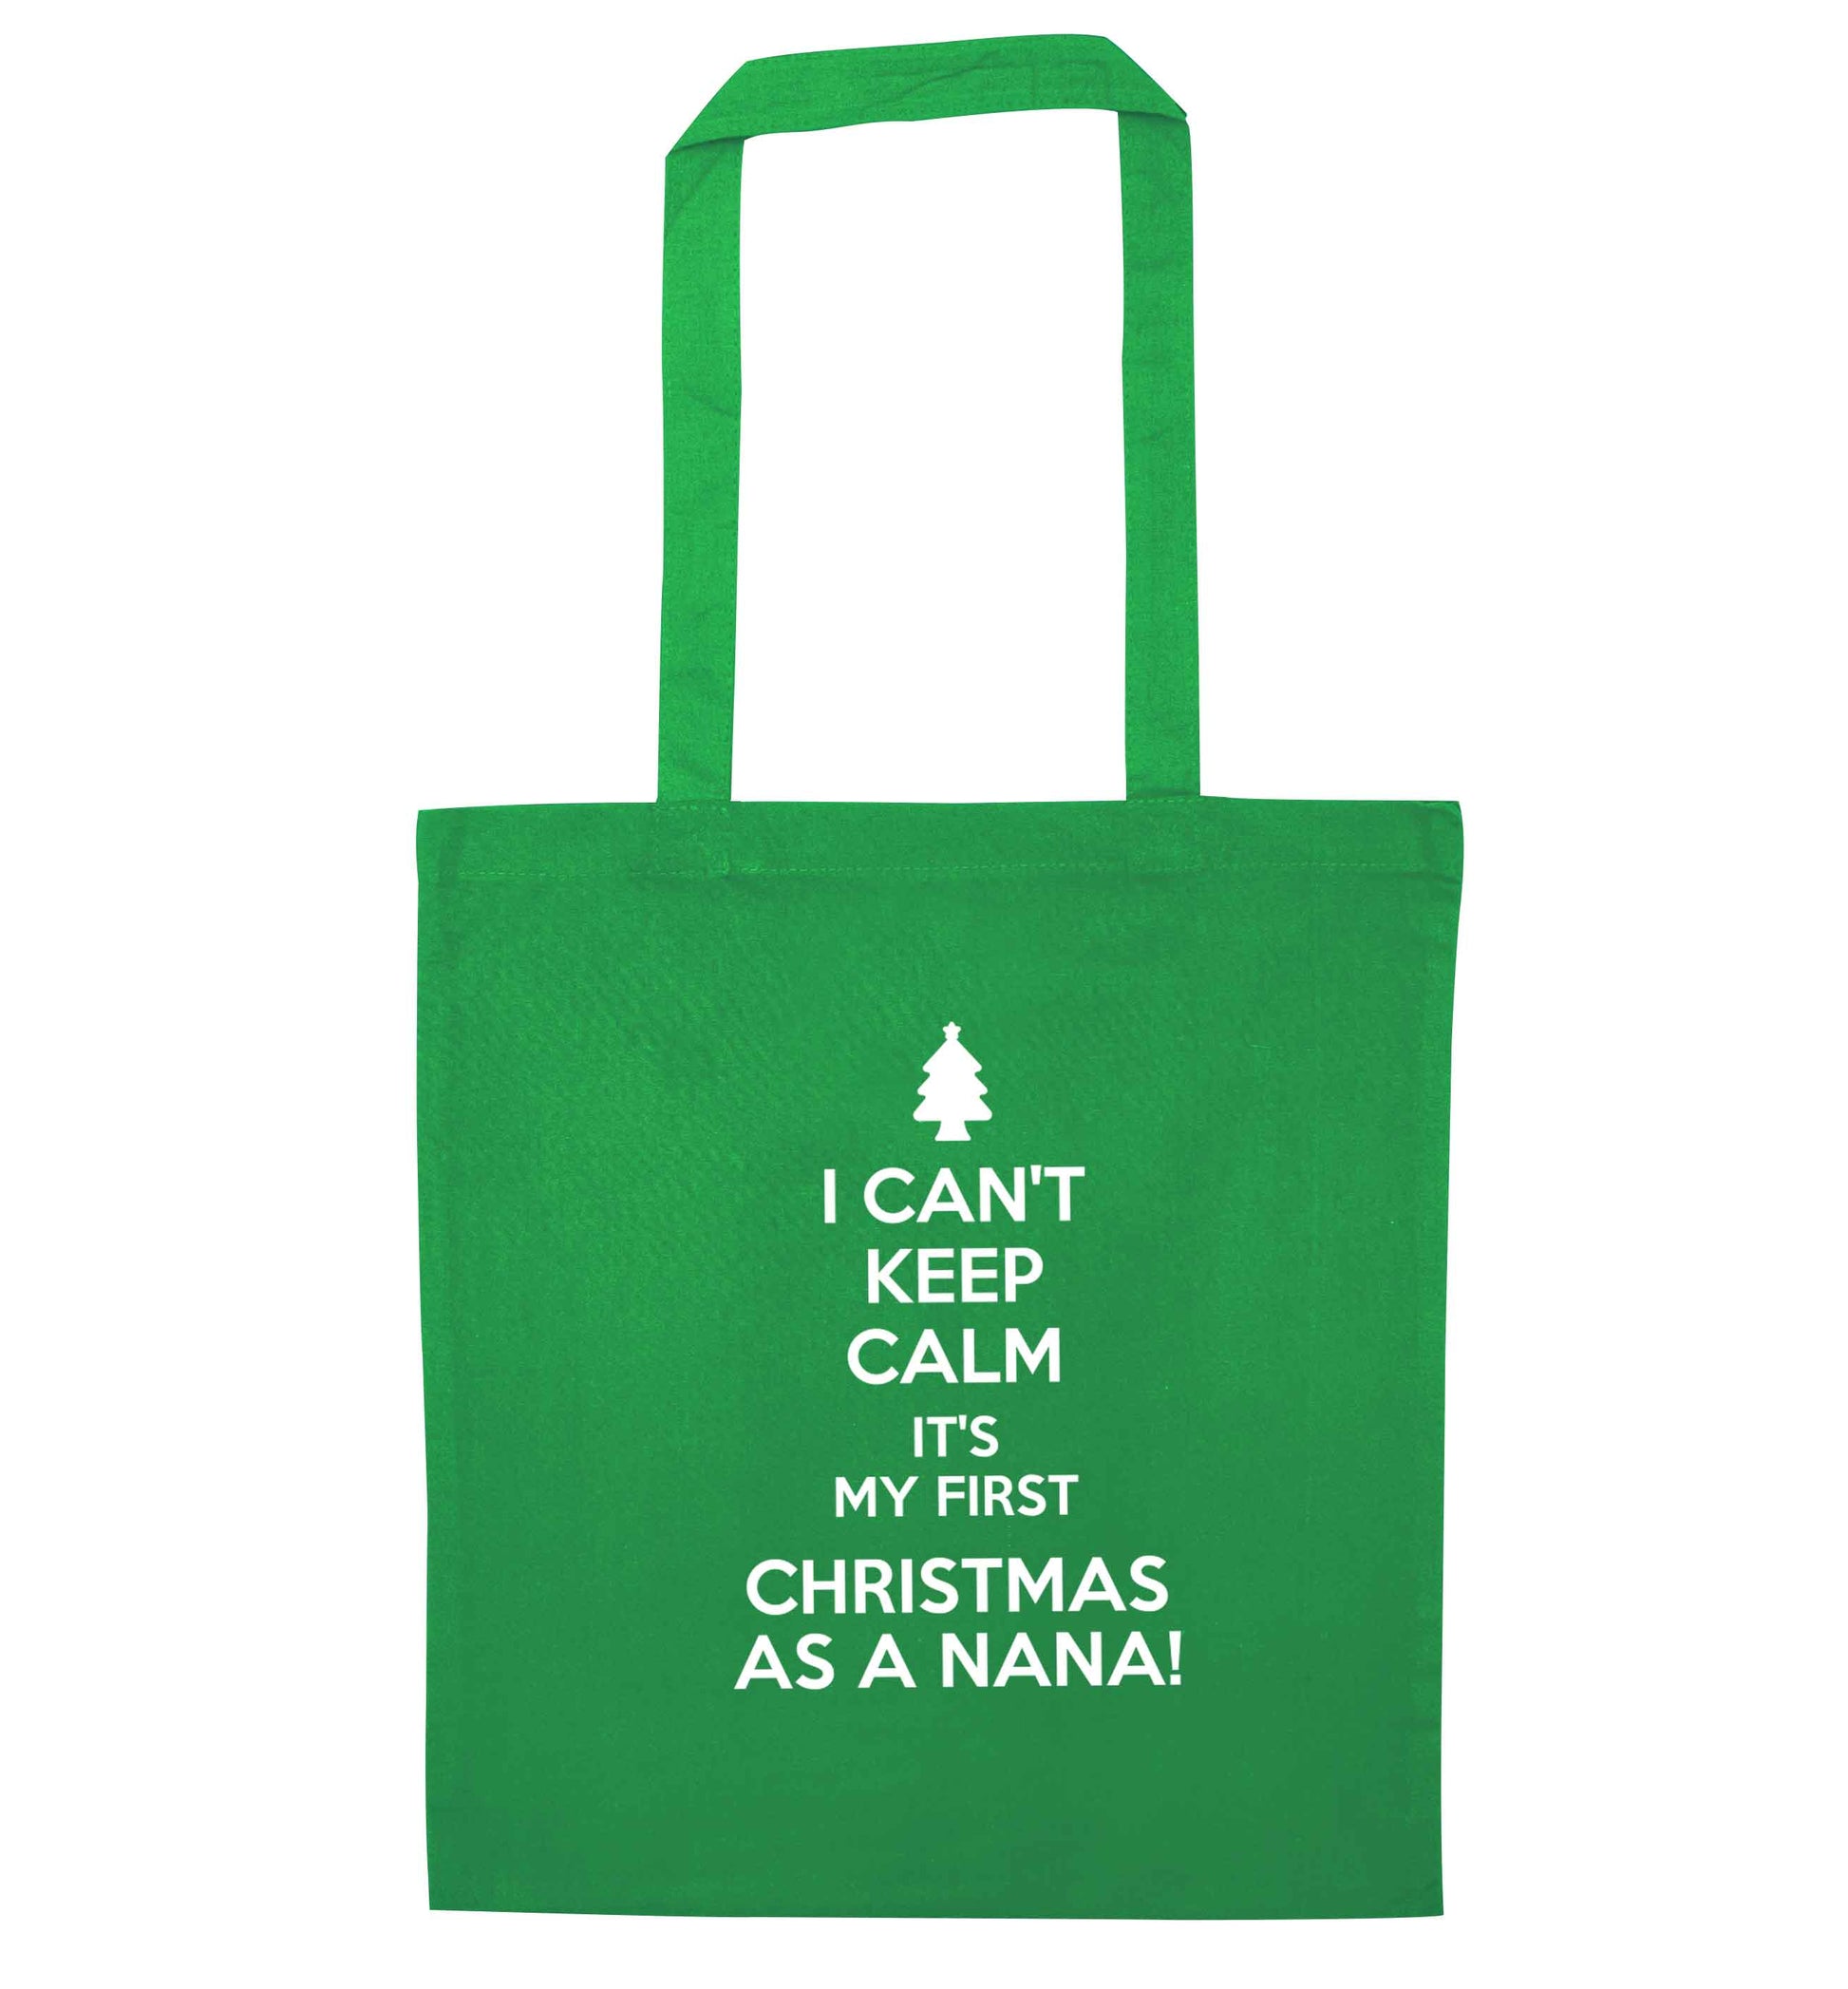 I can't keep calm it's my first Christmas as a nana! green tote bag